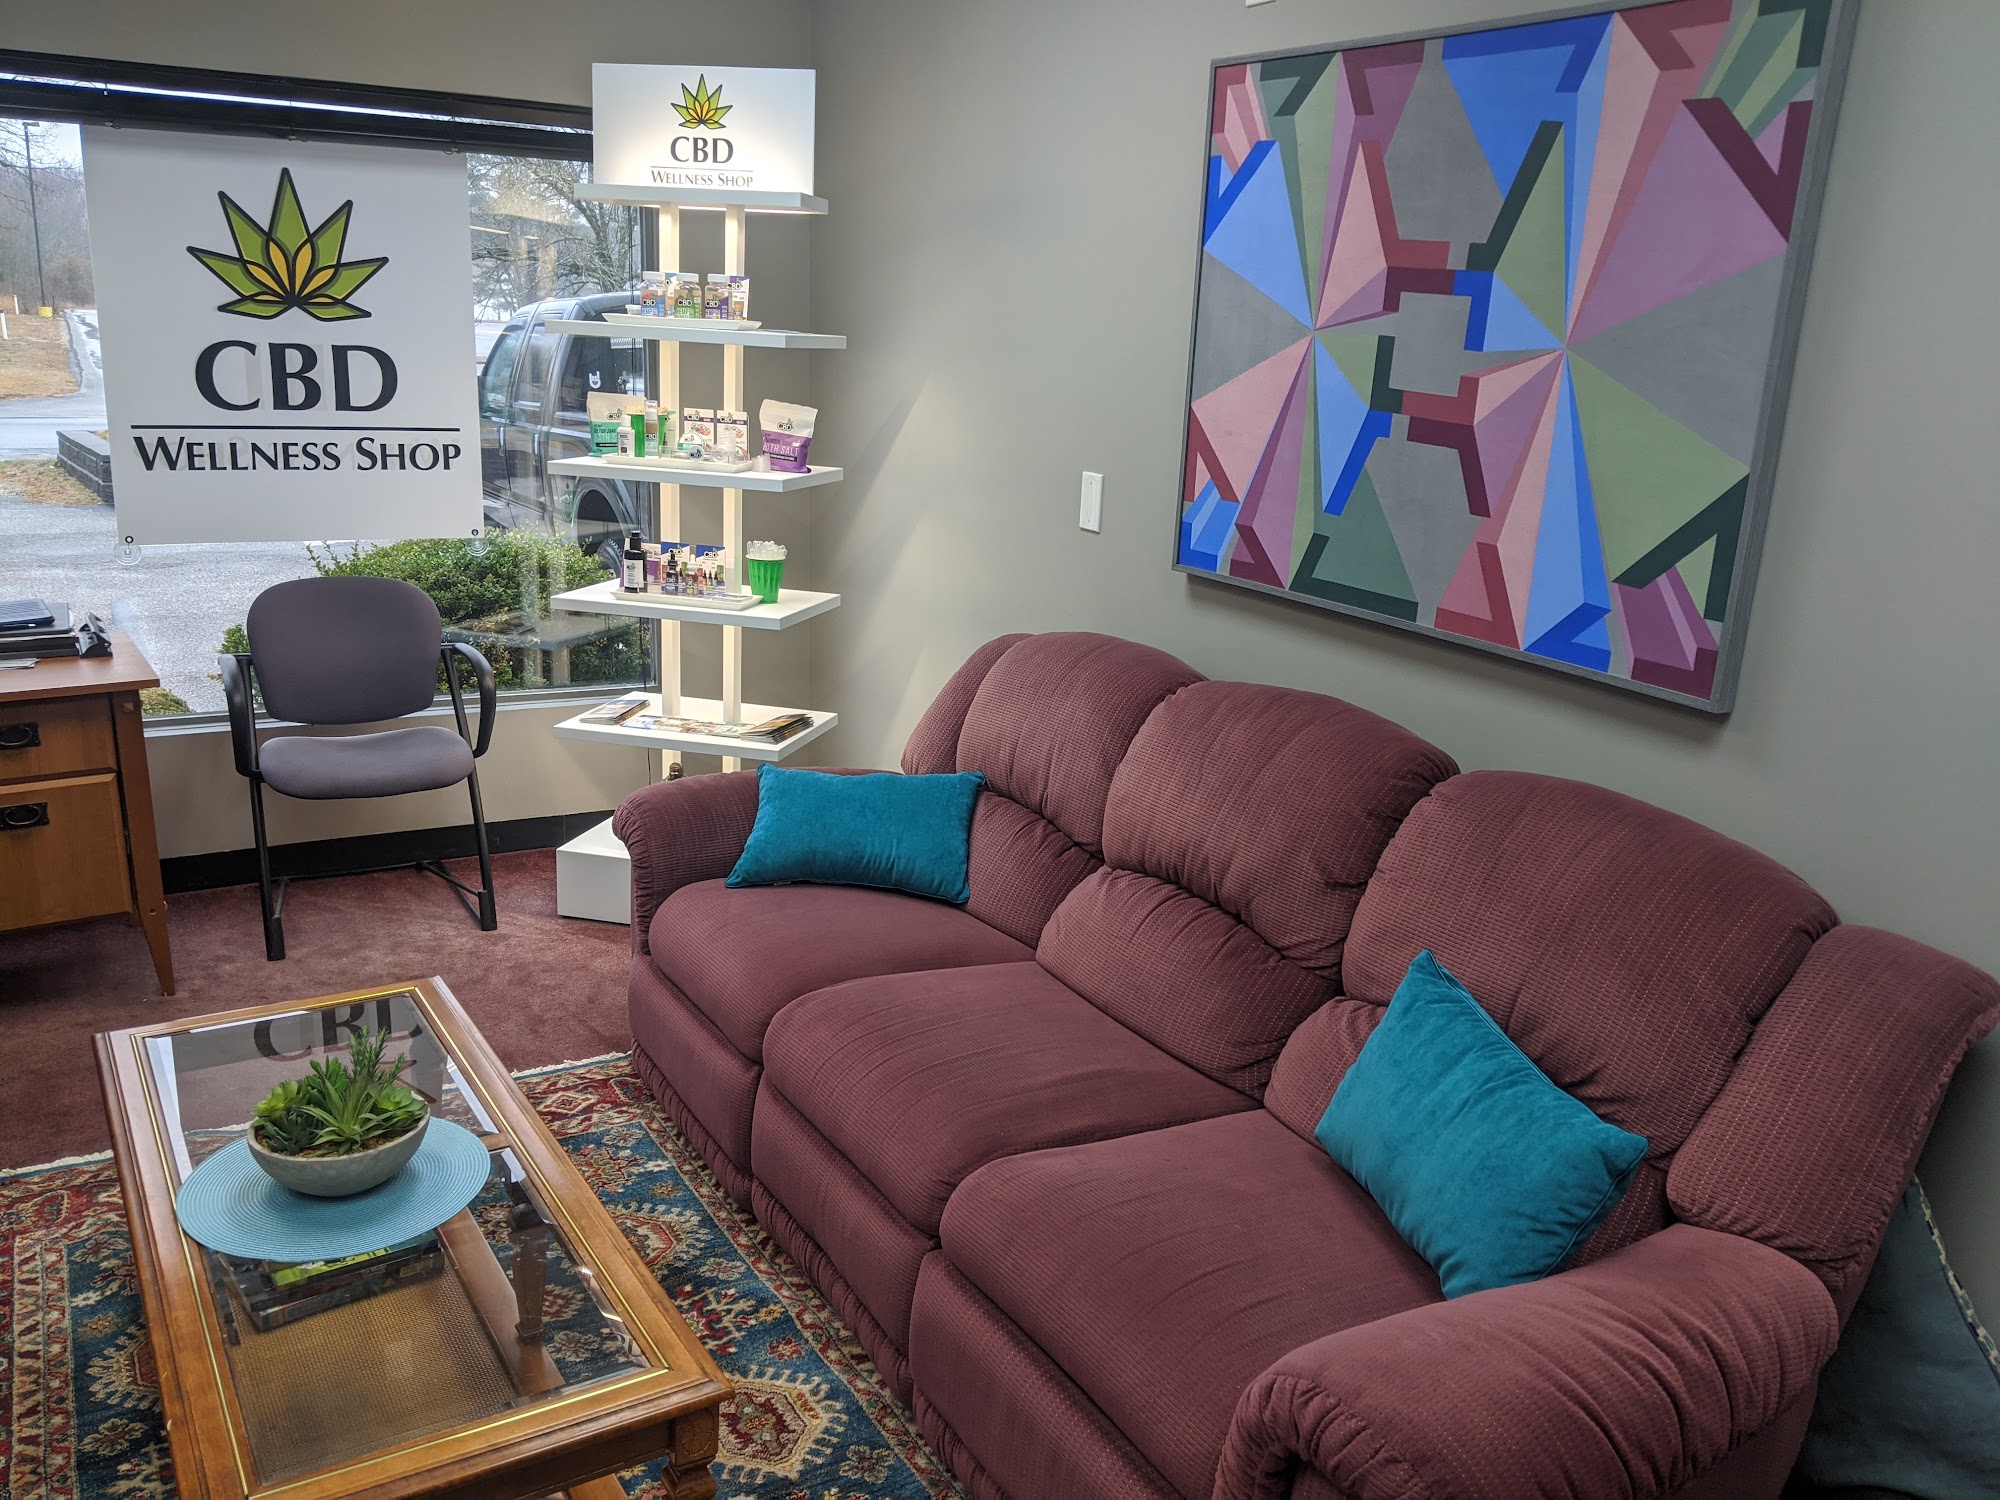 The CBD Wellness Shop ( located at Fitness Together)